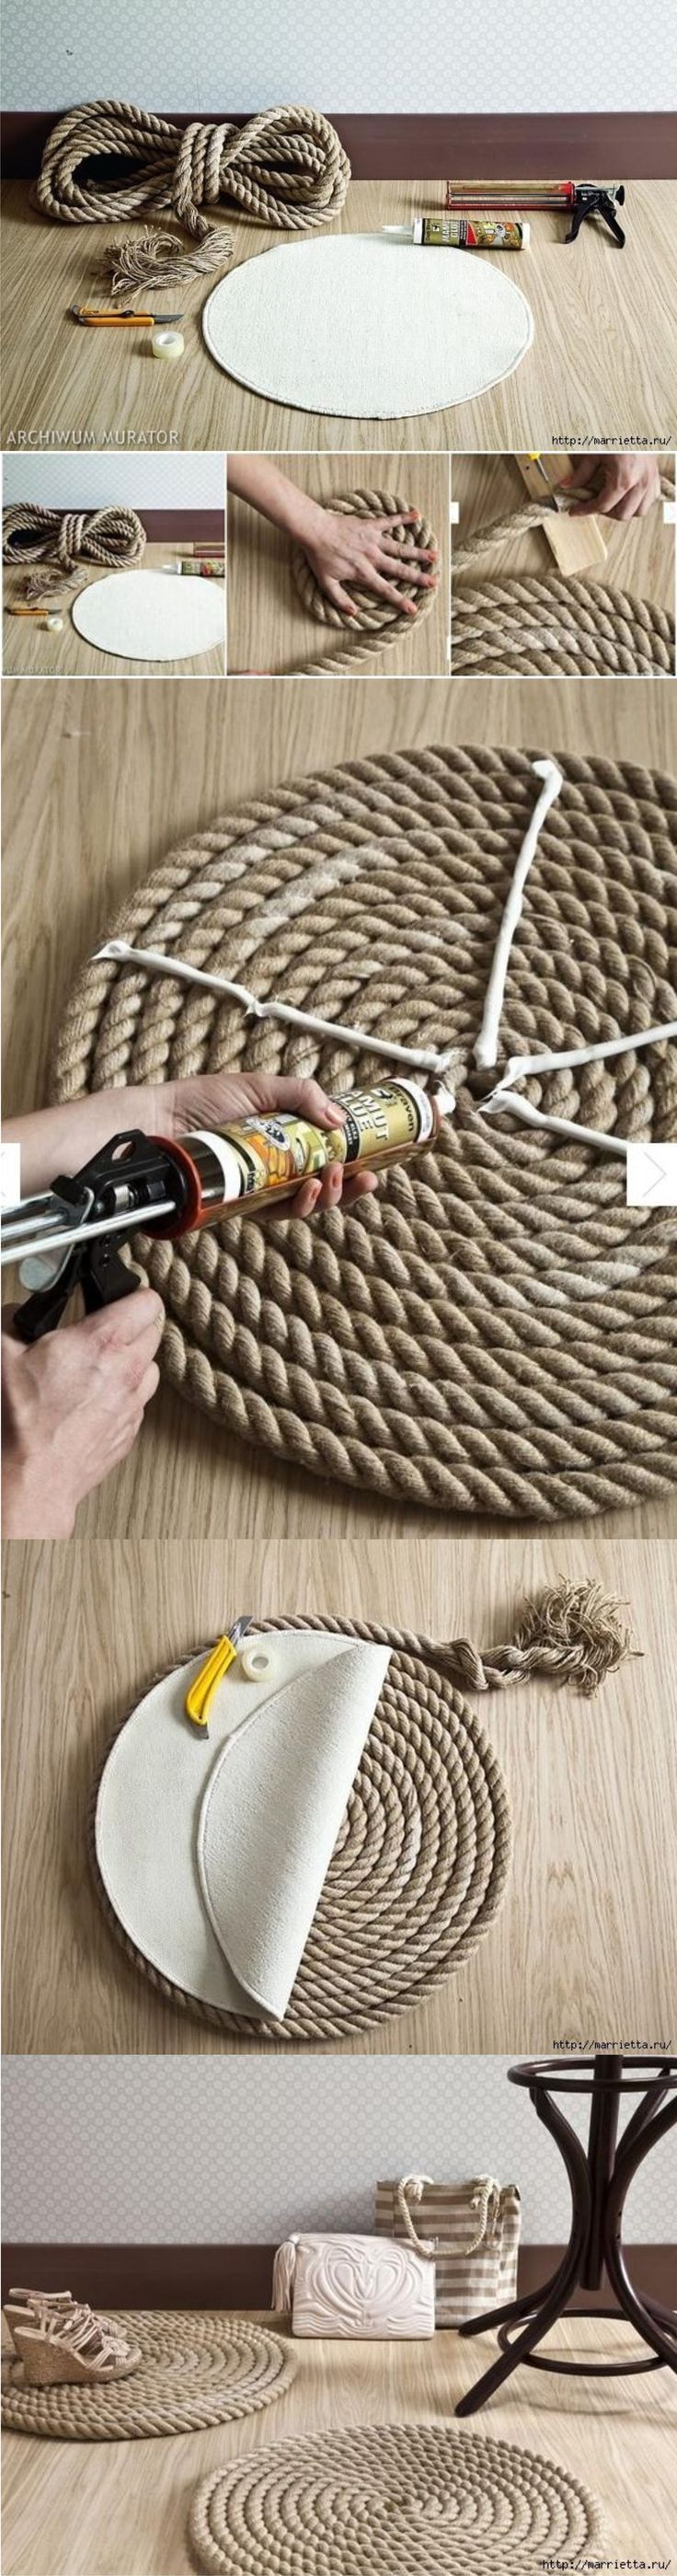 25 Awesome DIY Crafting Ideas For Working With Ropes 8